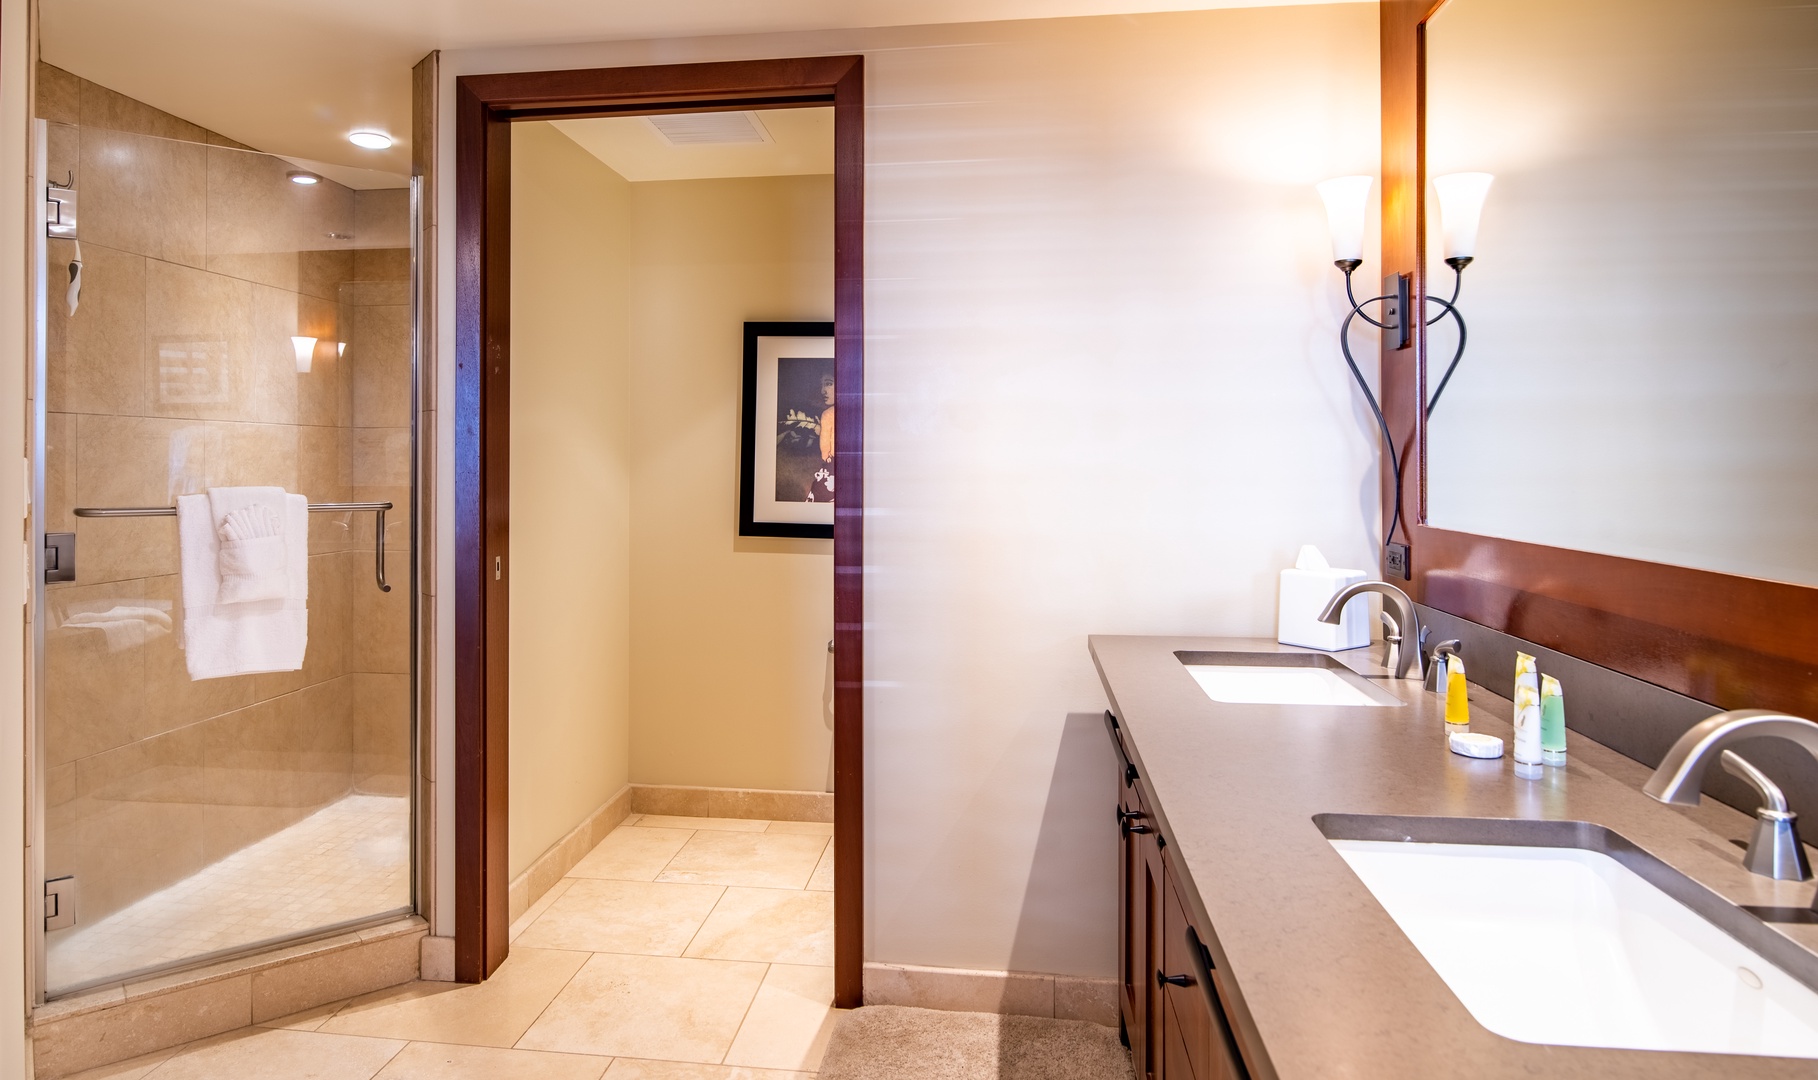 Kapolei Vacation Rentals, Ko Olina Beach Villas B609 - The primary guest bathroom with a walk-in shower.